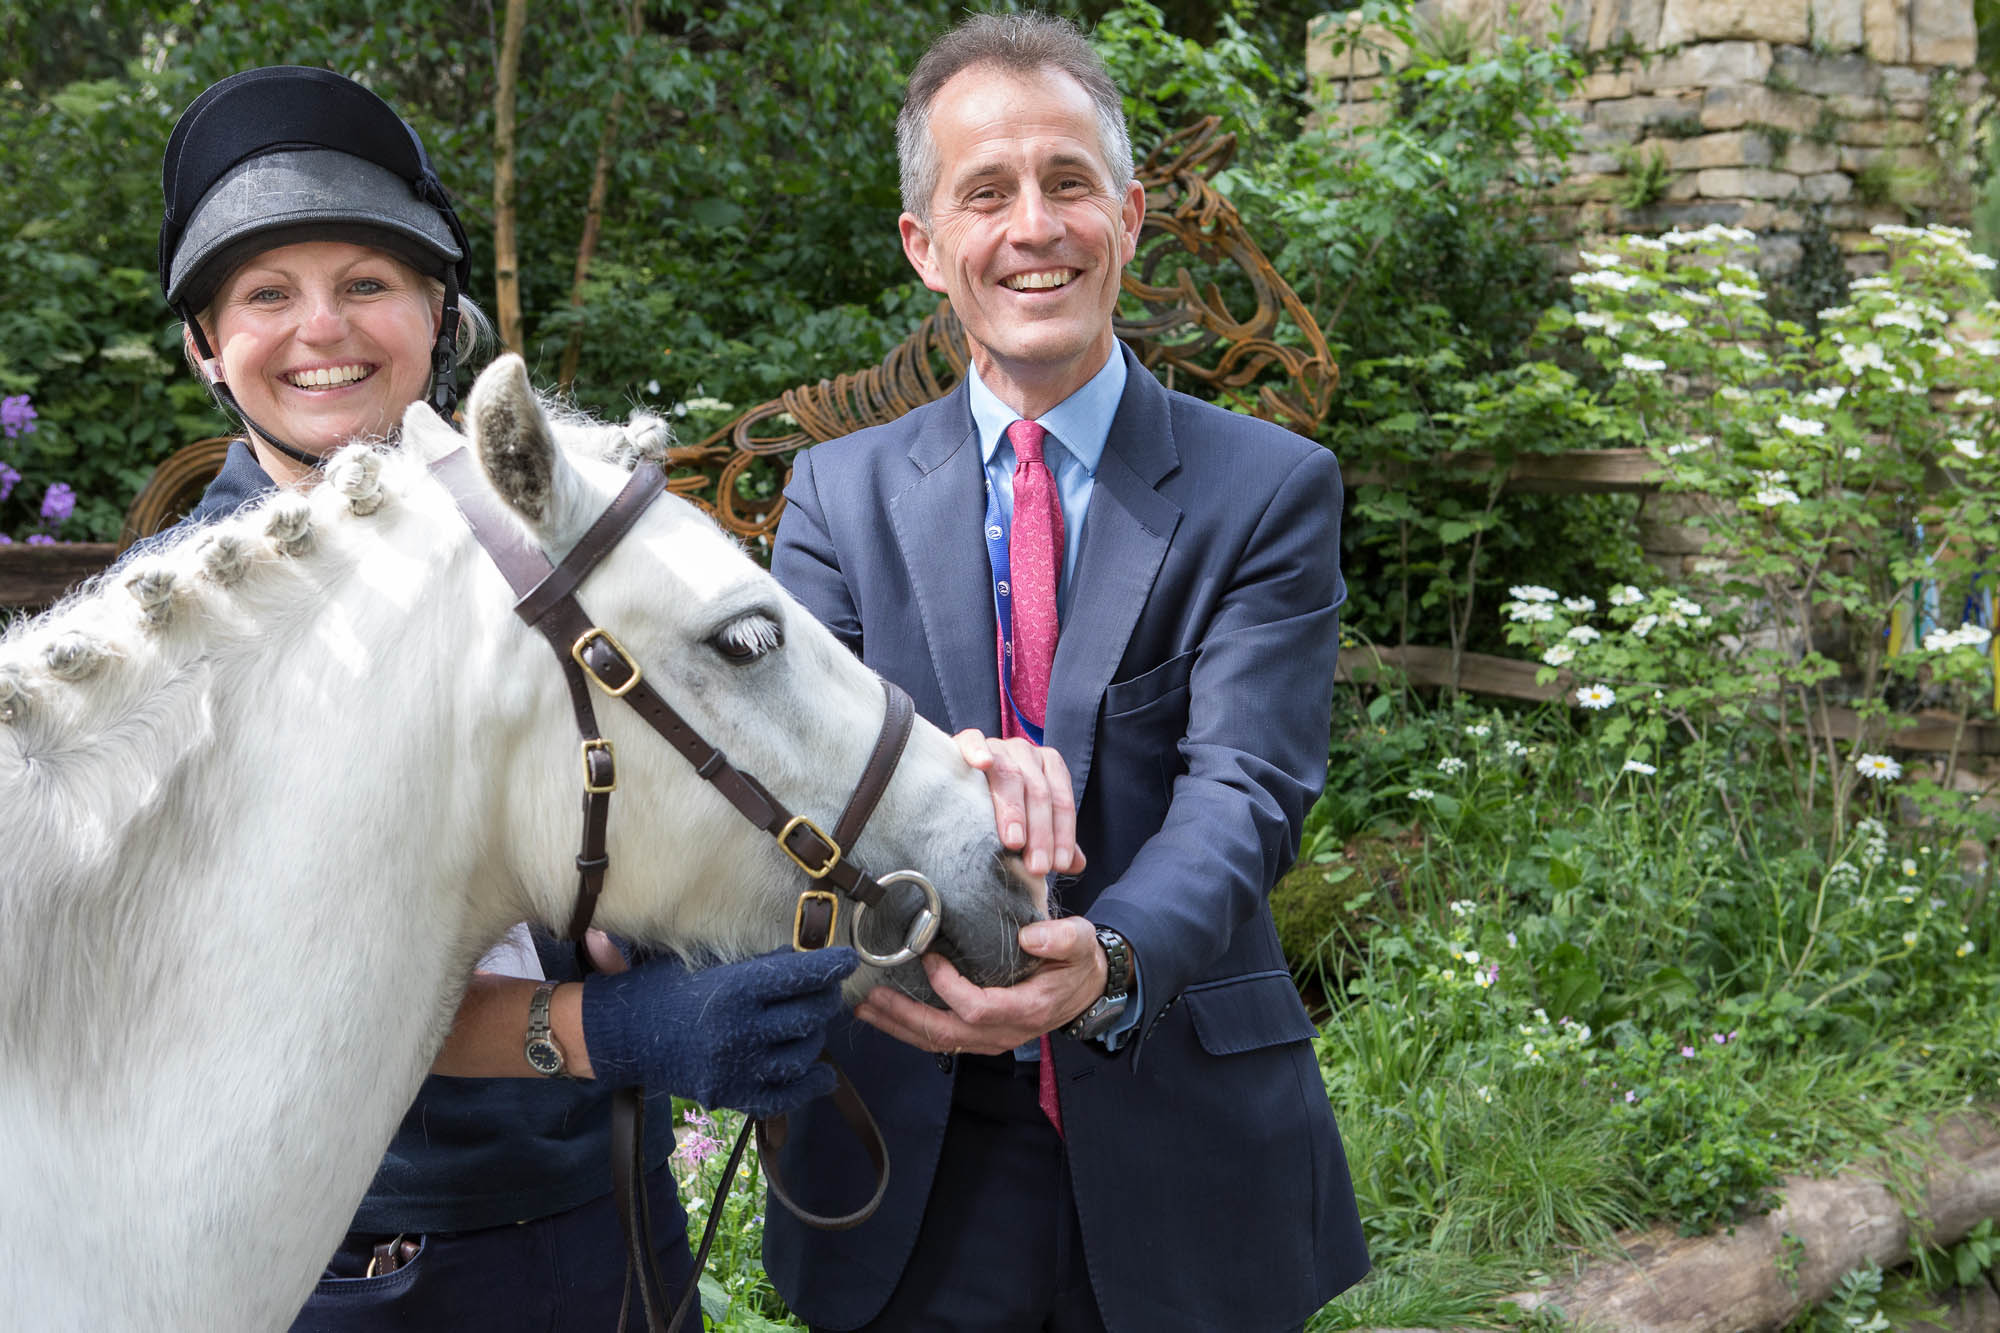 “More icing than cake” says World Horse Welfare CEO on winning RHS Chelsea Flower Show People’s Choice Award